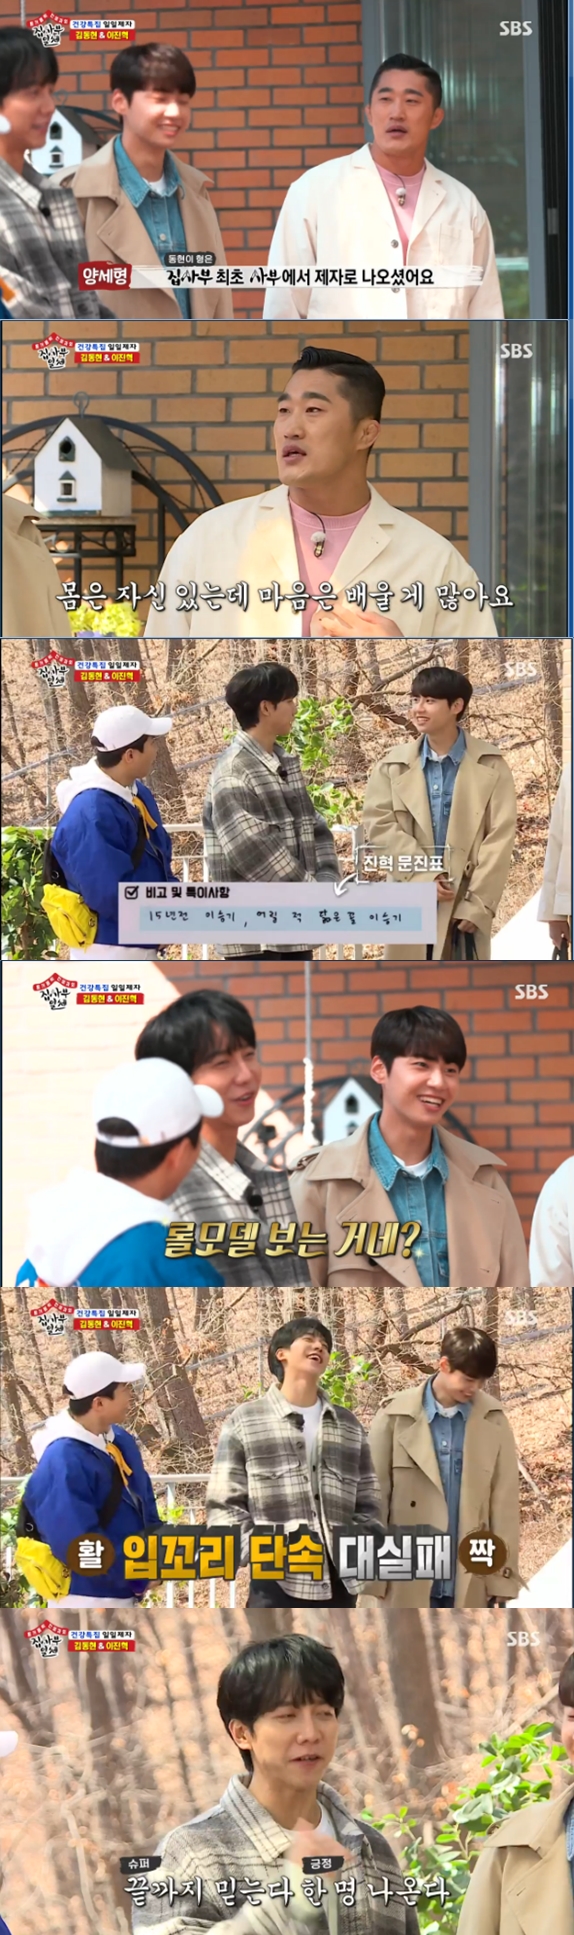 Again, a celebrity who made Lee Seung-gi a role model came out.Kim Dong-Hyun and Lee Jin-hyuk came out as daily guests and went to meet with the members of the SBS entertainment program All The Butlers on the 5th night.Lee Seung-gi said, I heard a lot of sound that resembles Lee Seung-gi 15 years ago, when Lee Jin-hyuk appeared.Lee Jin-hyuk said, Kang Ho-dong told me.I heard a lot of sound that I resemble Lee Seung-gi from my childhood, he said. When my mother said she was going to the recording today, she told me to meet the role model.Lee Seung-gi laughed at the failure of the Financial Crimes Enforcement Network.When Yang Se-hyeong said, This is all about you, Lee Seung-gi said, This is one coming out.